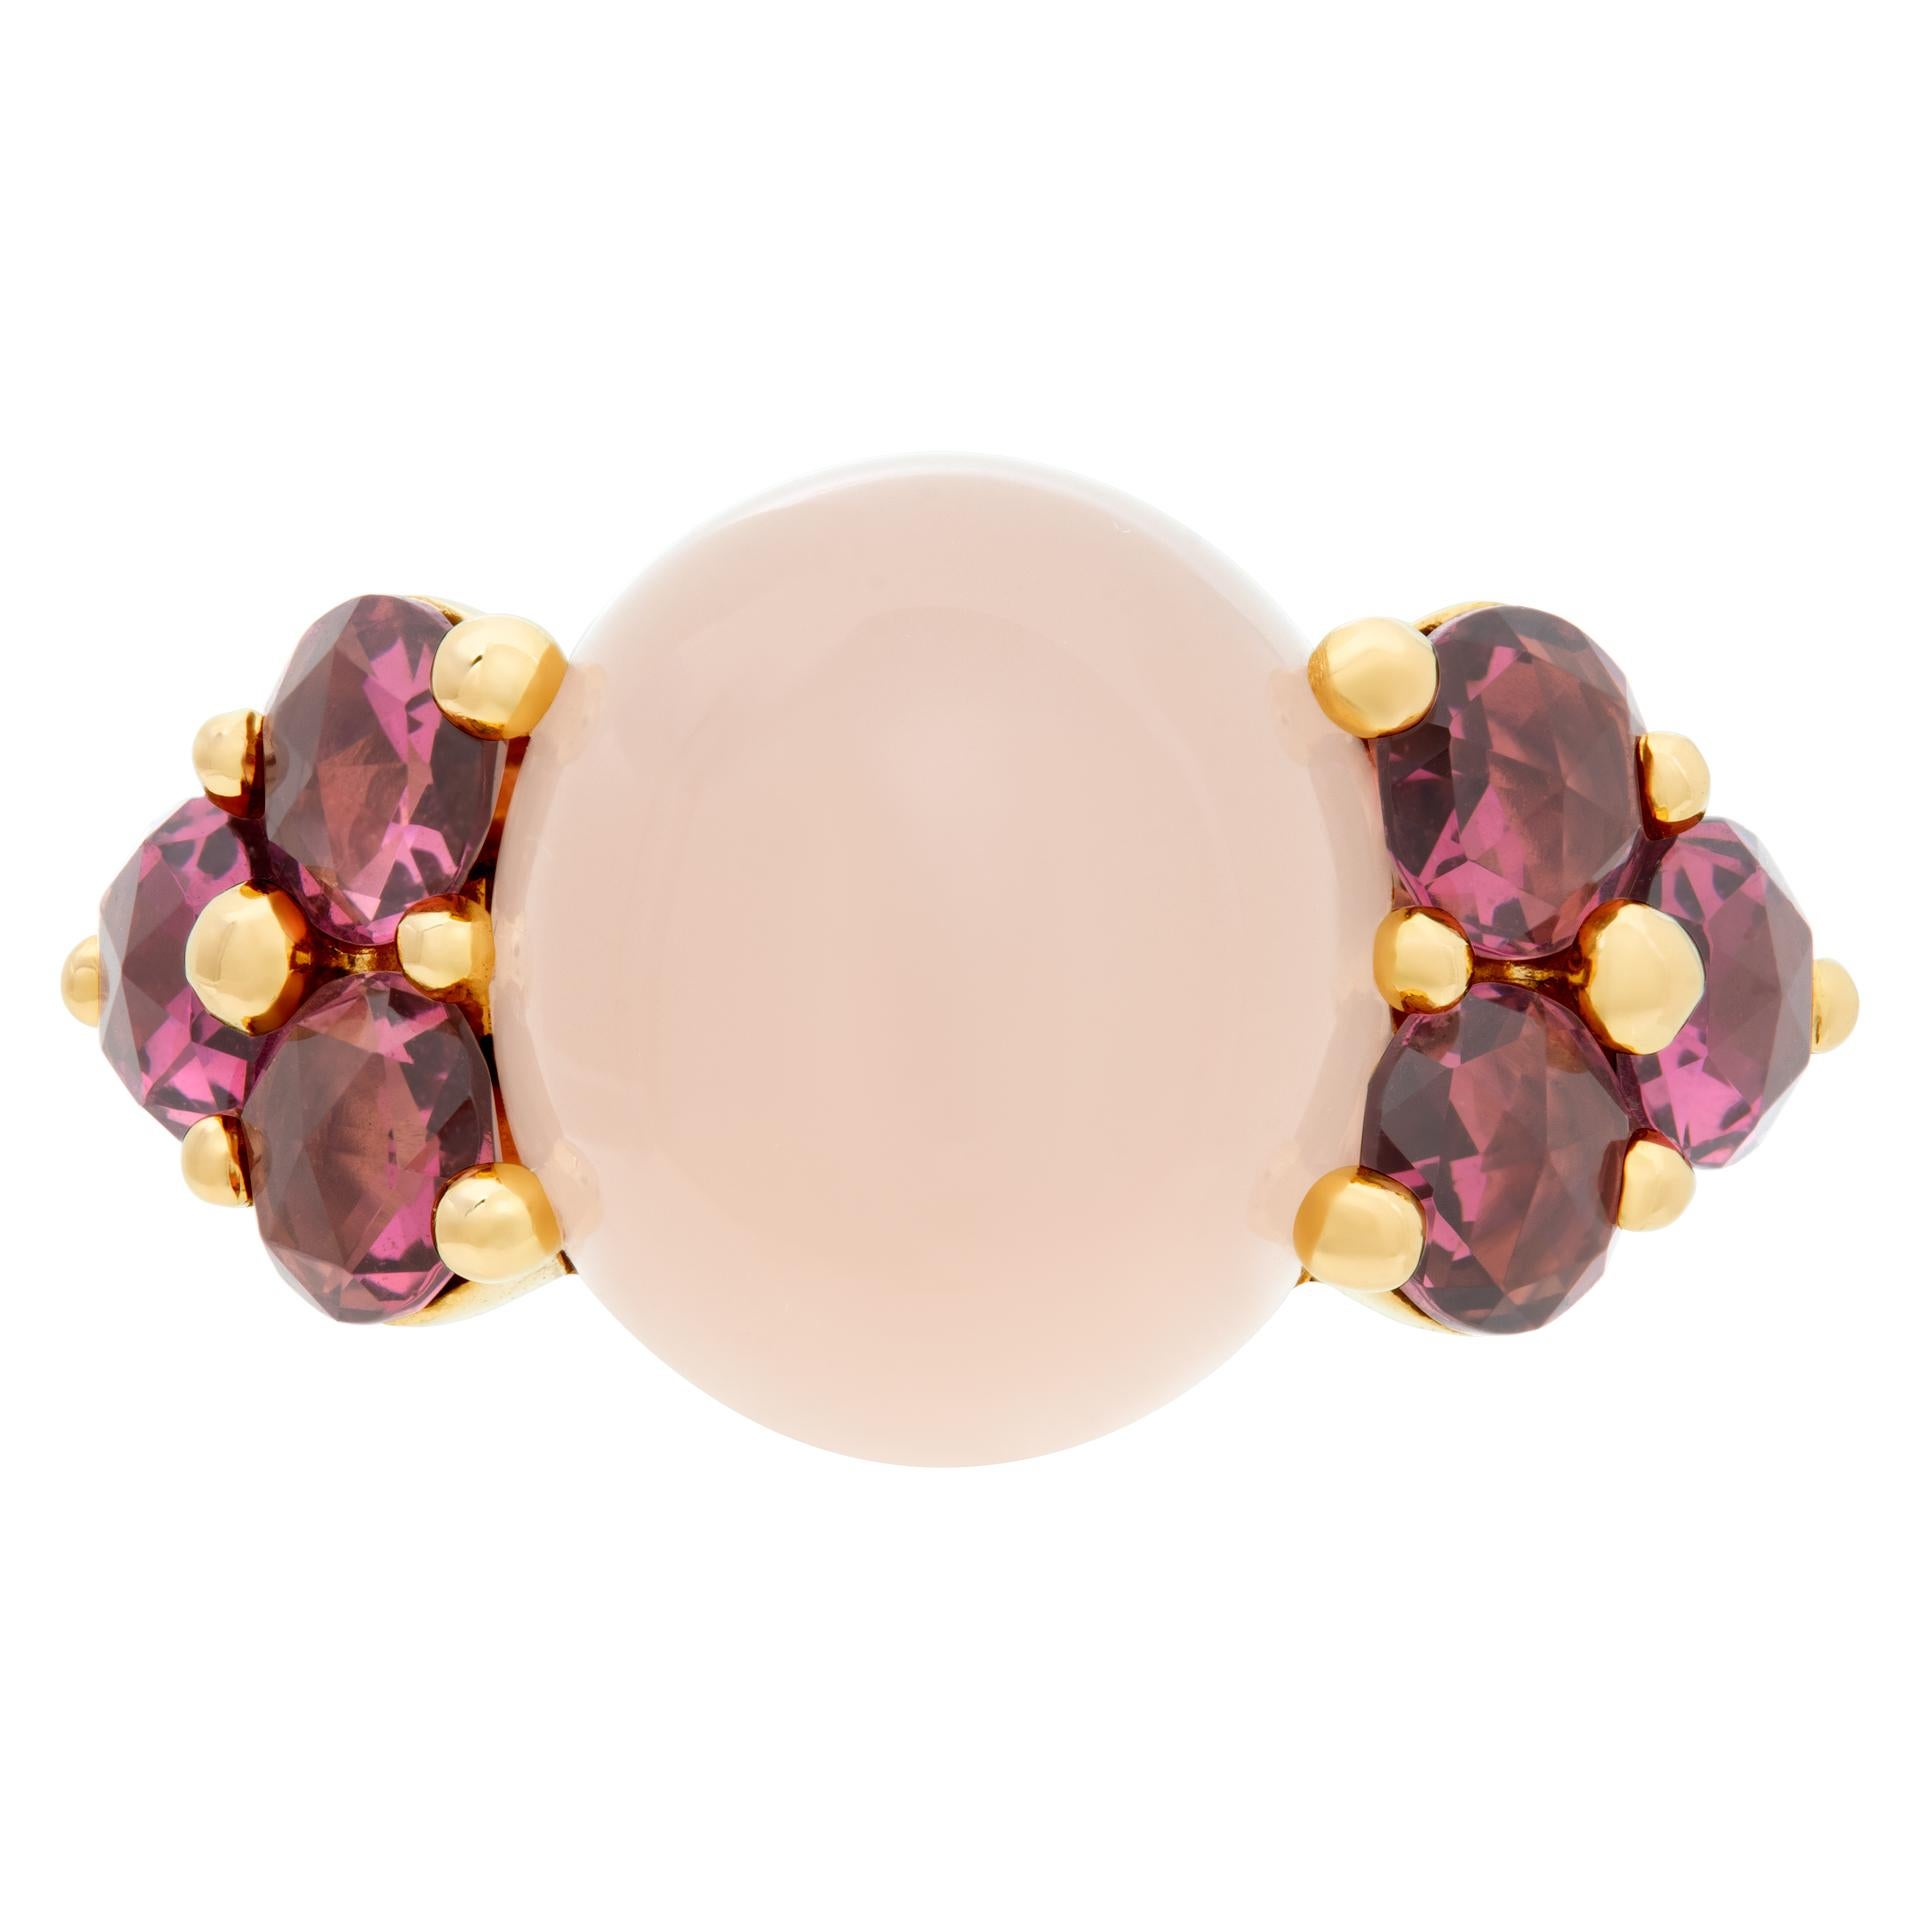 Pomellato Luna ring in 18k rose gold with cabochon rose quartz and six side pink tourmaline stones. Ring size 5.This Pomellato ring is currently size 5 and some items can be sized up or down, please ask! It weighs 5.9 pennyweights and is 18k rose